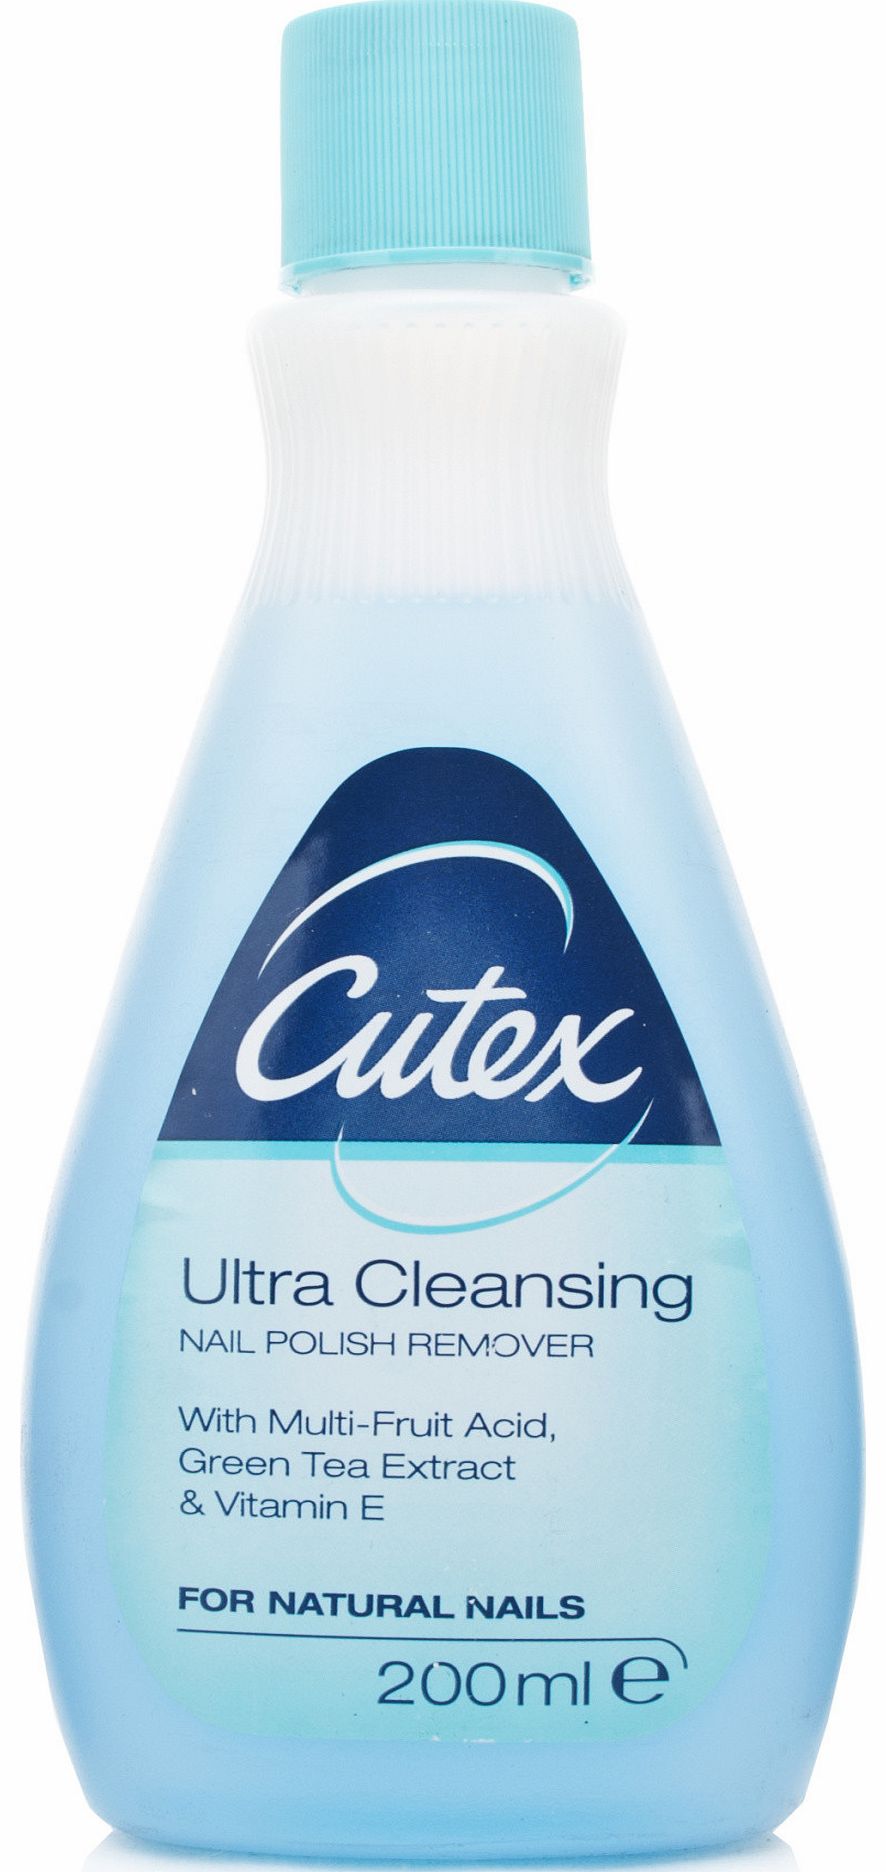 Ultra Cleansing Nail Polish Remover